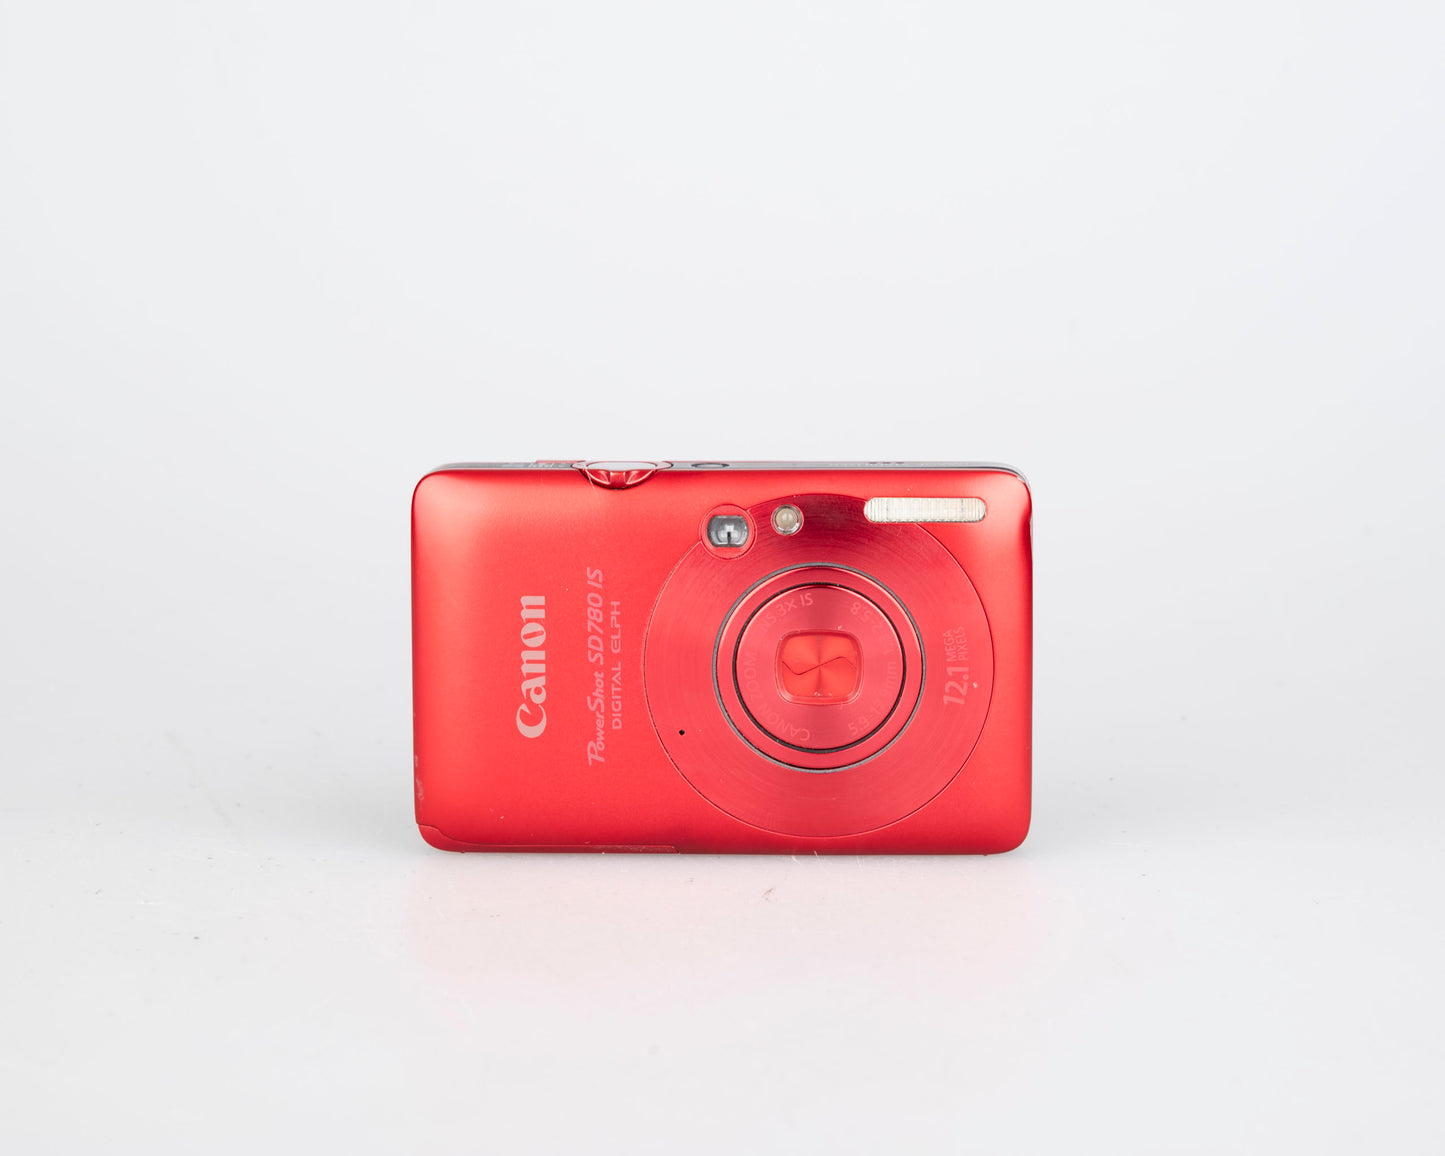 Canon Powershot SD780 IS Digital Elph 12.1MP CCD digicam w/ 8GB SD card + battery + charger